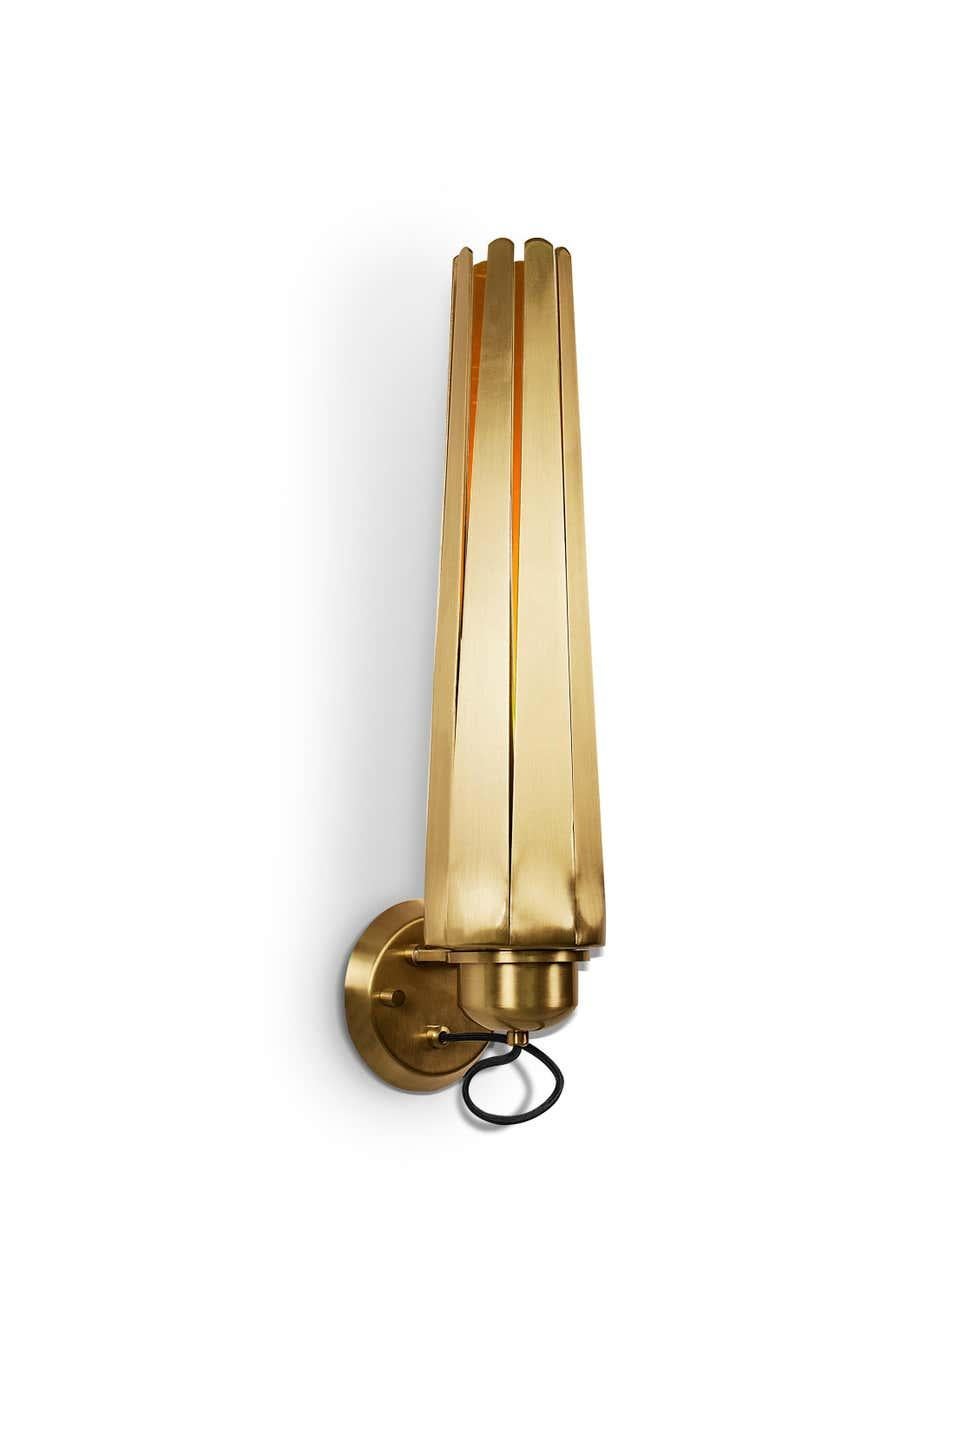 Wall light, a contemporary lighting piece in matte brass. This wall lamp is a versatile piece that will shine like lightning in any modern interior design.
Hammered aged brushed brass with glossy varnish

Measures: Height 25.99 in. (66 cm)
Width